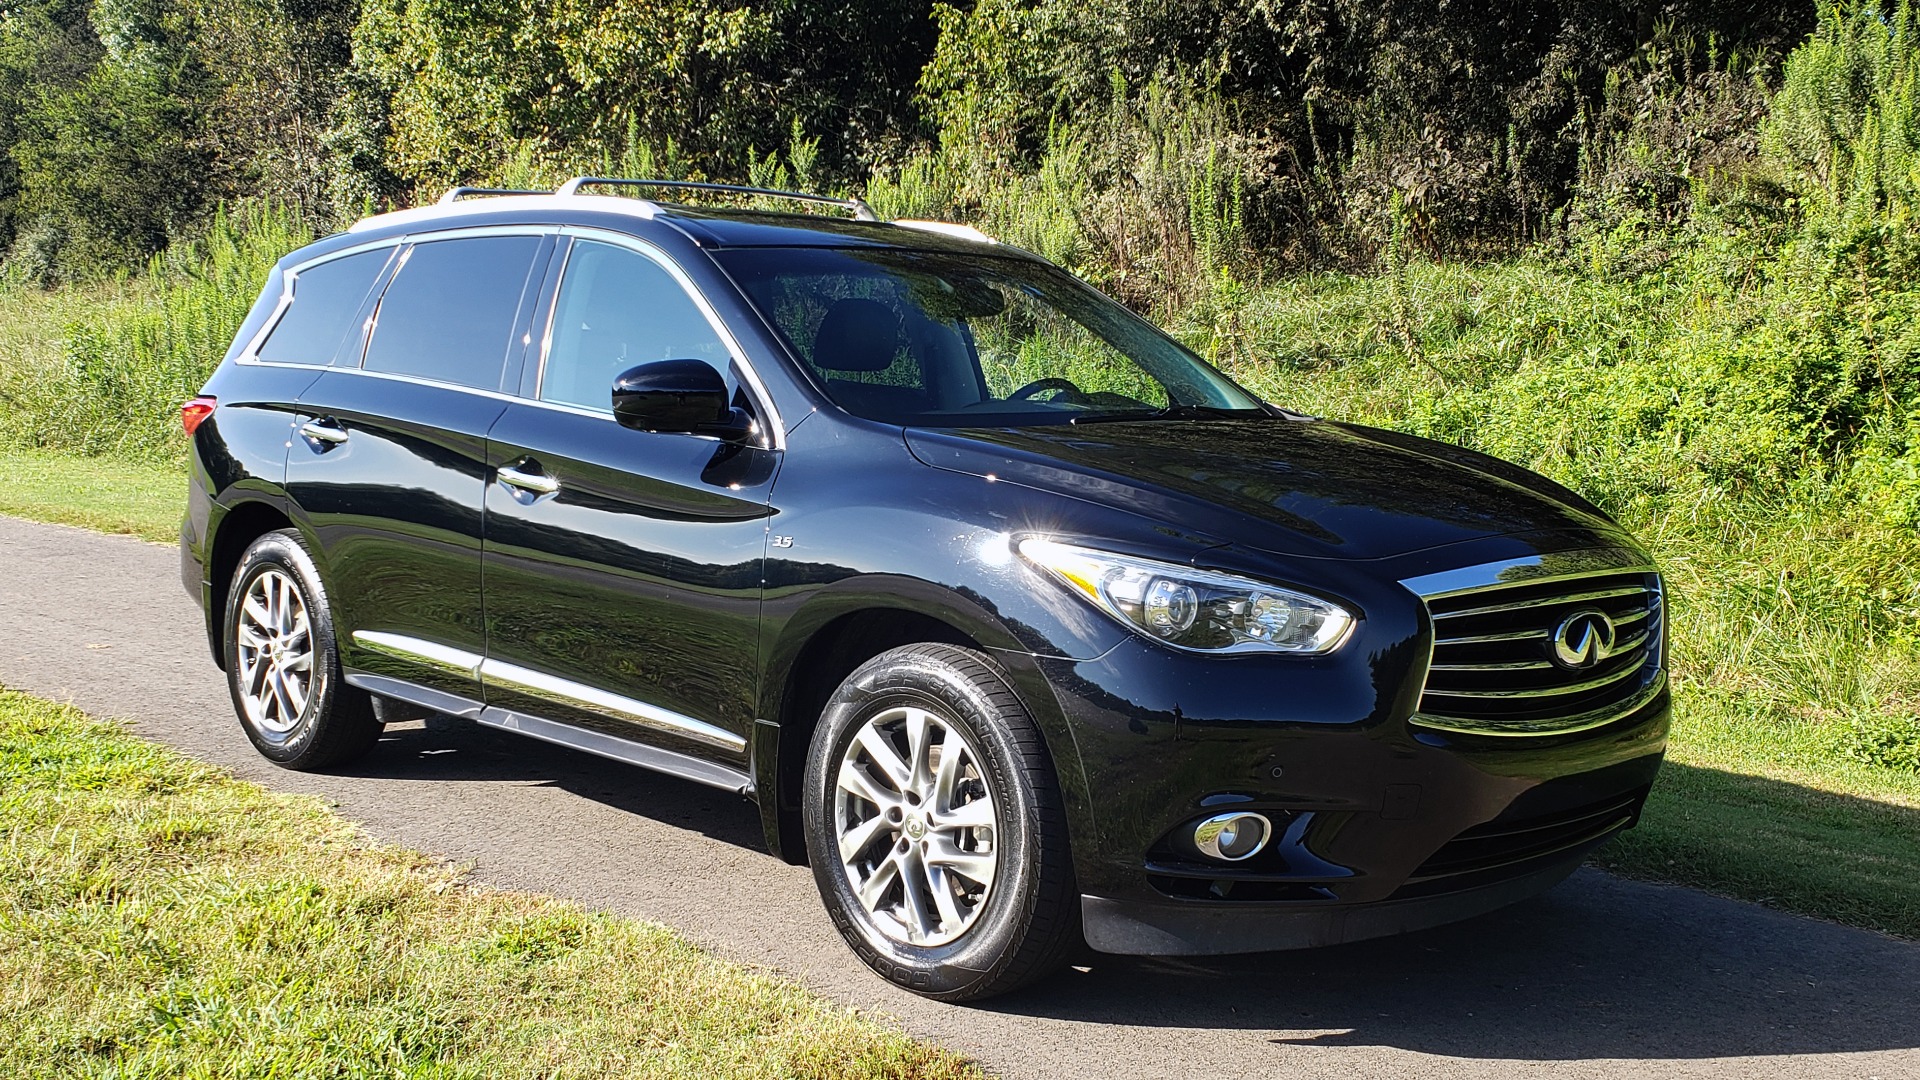 Used 2015 INFINITI QX60 AWD / PREM PLUS PKG / NAV / SUNROOF / BOSE / 3-ROW / REARVIEW for sale Sold at Formula Imports in Charlotte NC 28227 3